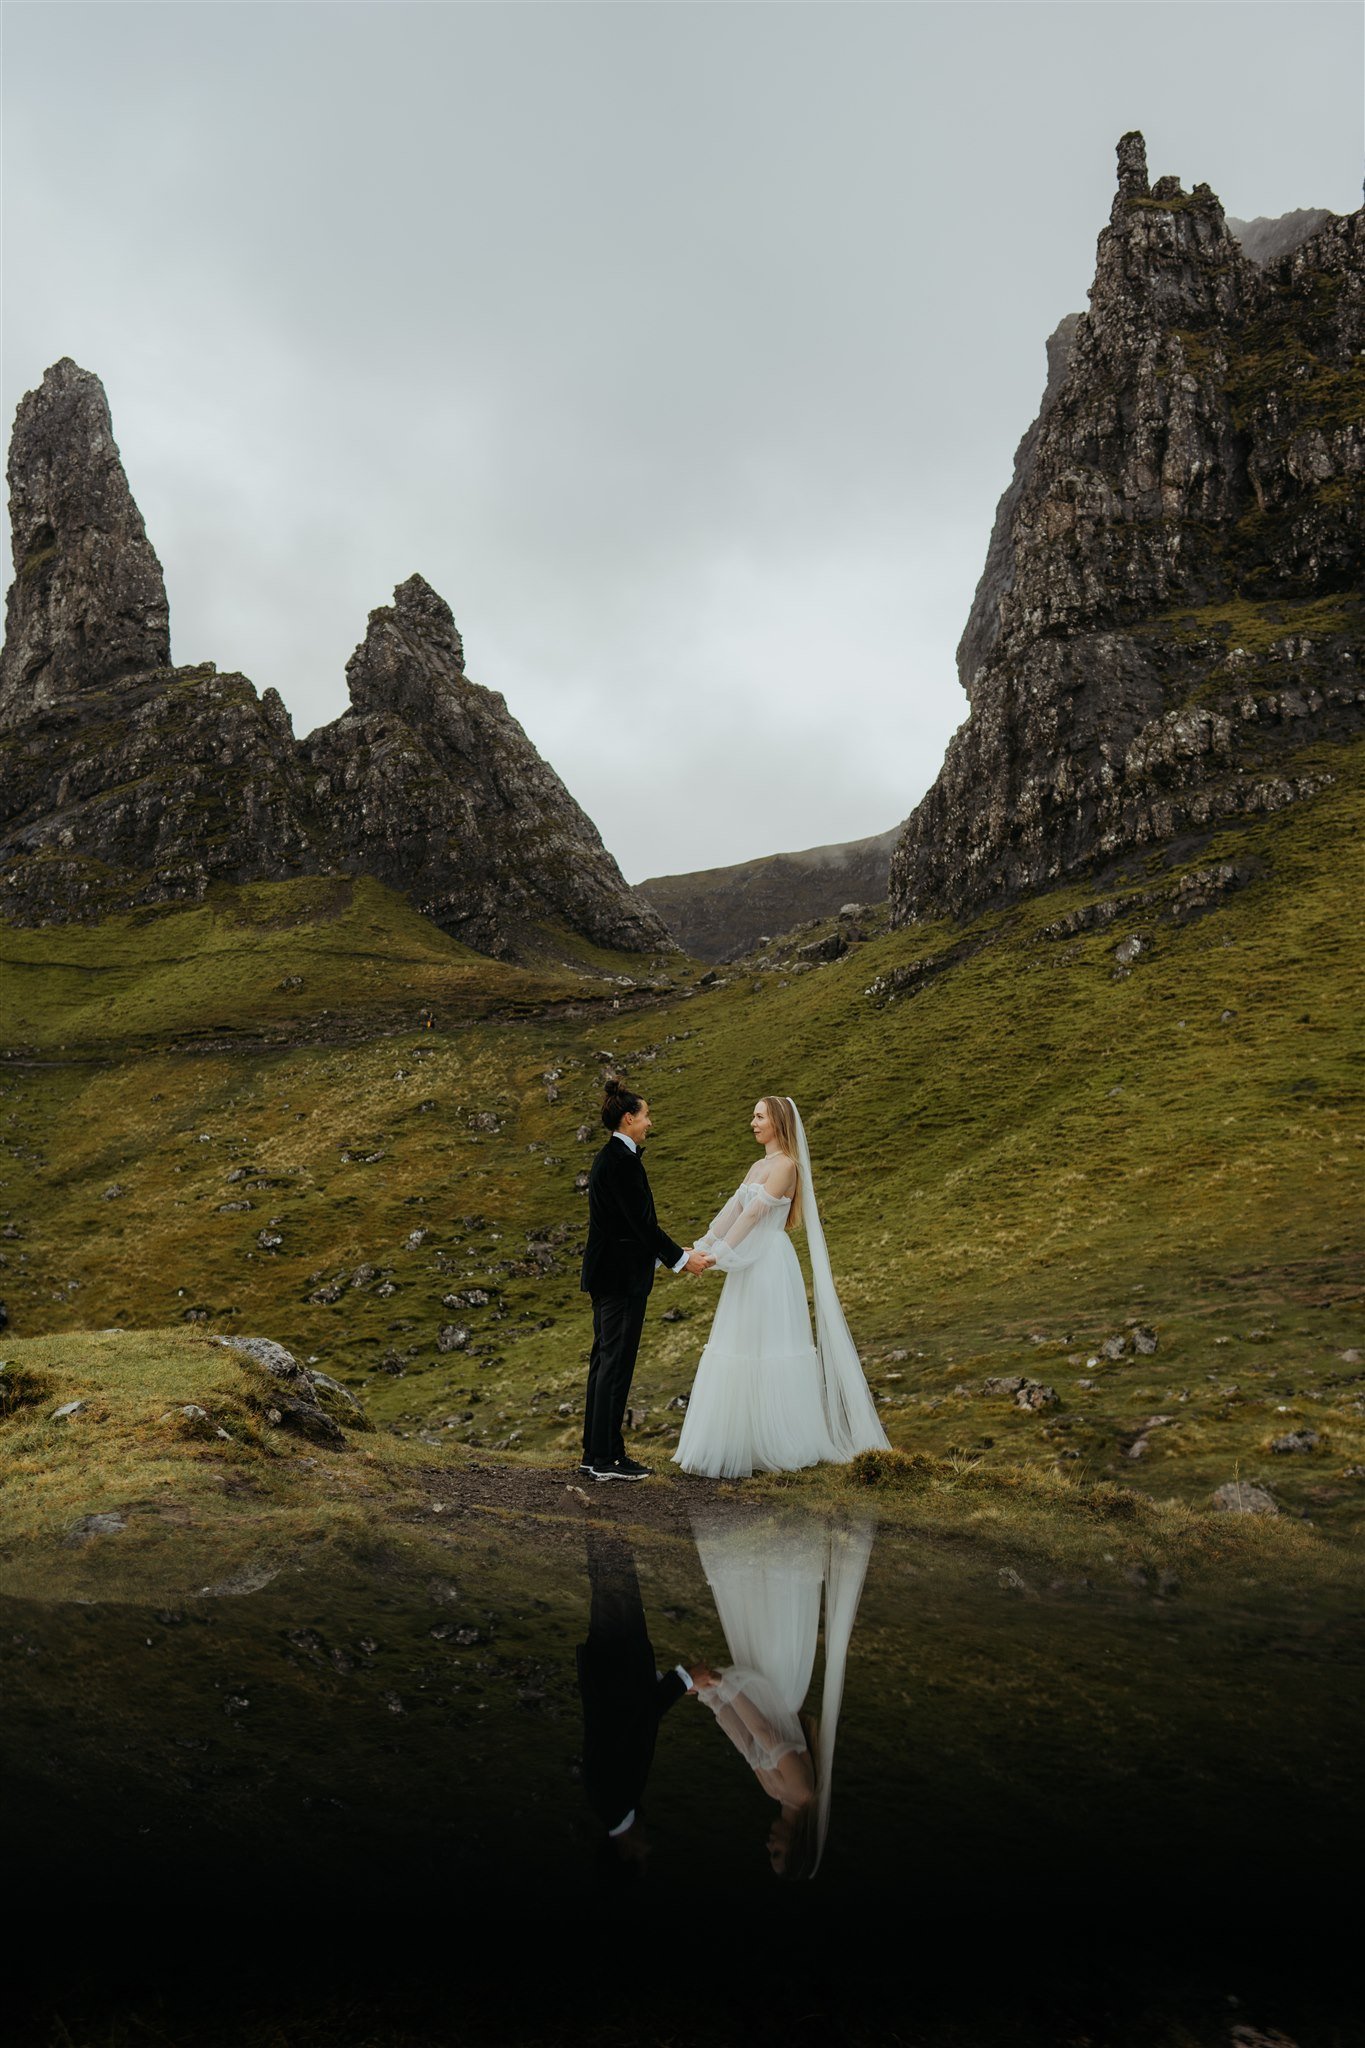 Brides hold hands and exchange vows while standing on a mossy hill during their elopement on the Isle of Skye